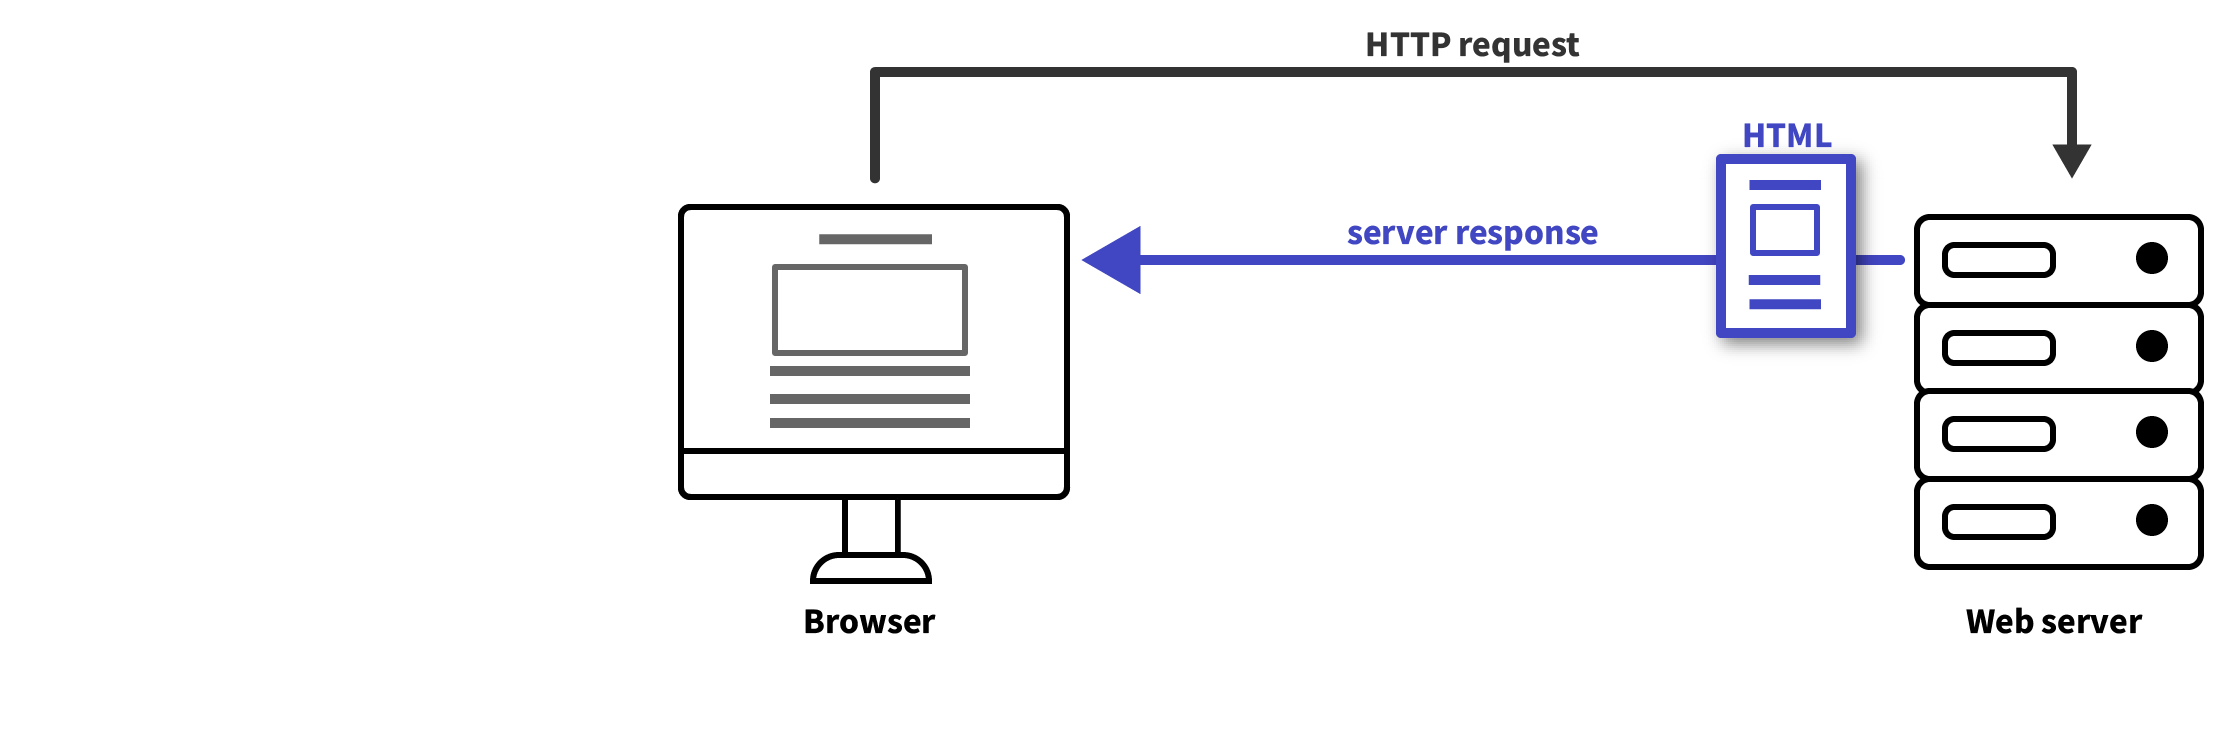 A diagram illustrating the communication between a browser and a web server. The browser sends a request to the server, and the server responds by sending an HTML file